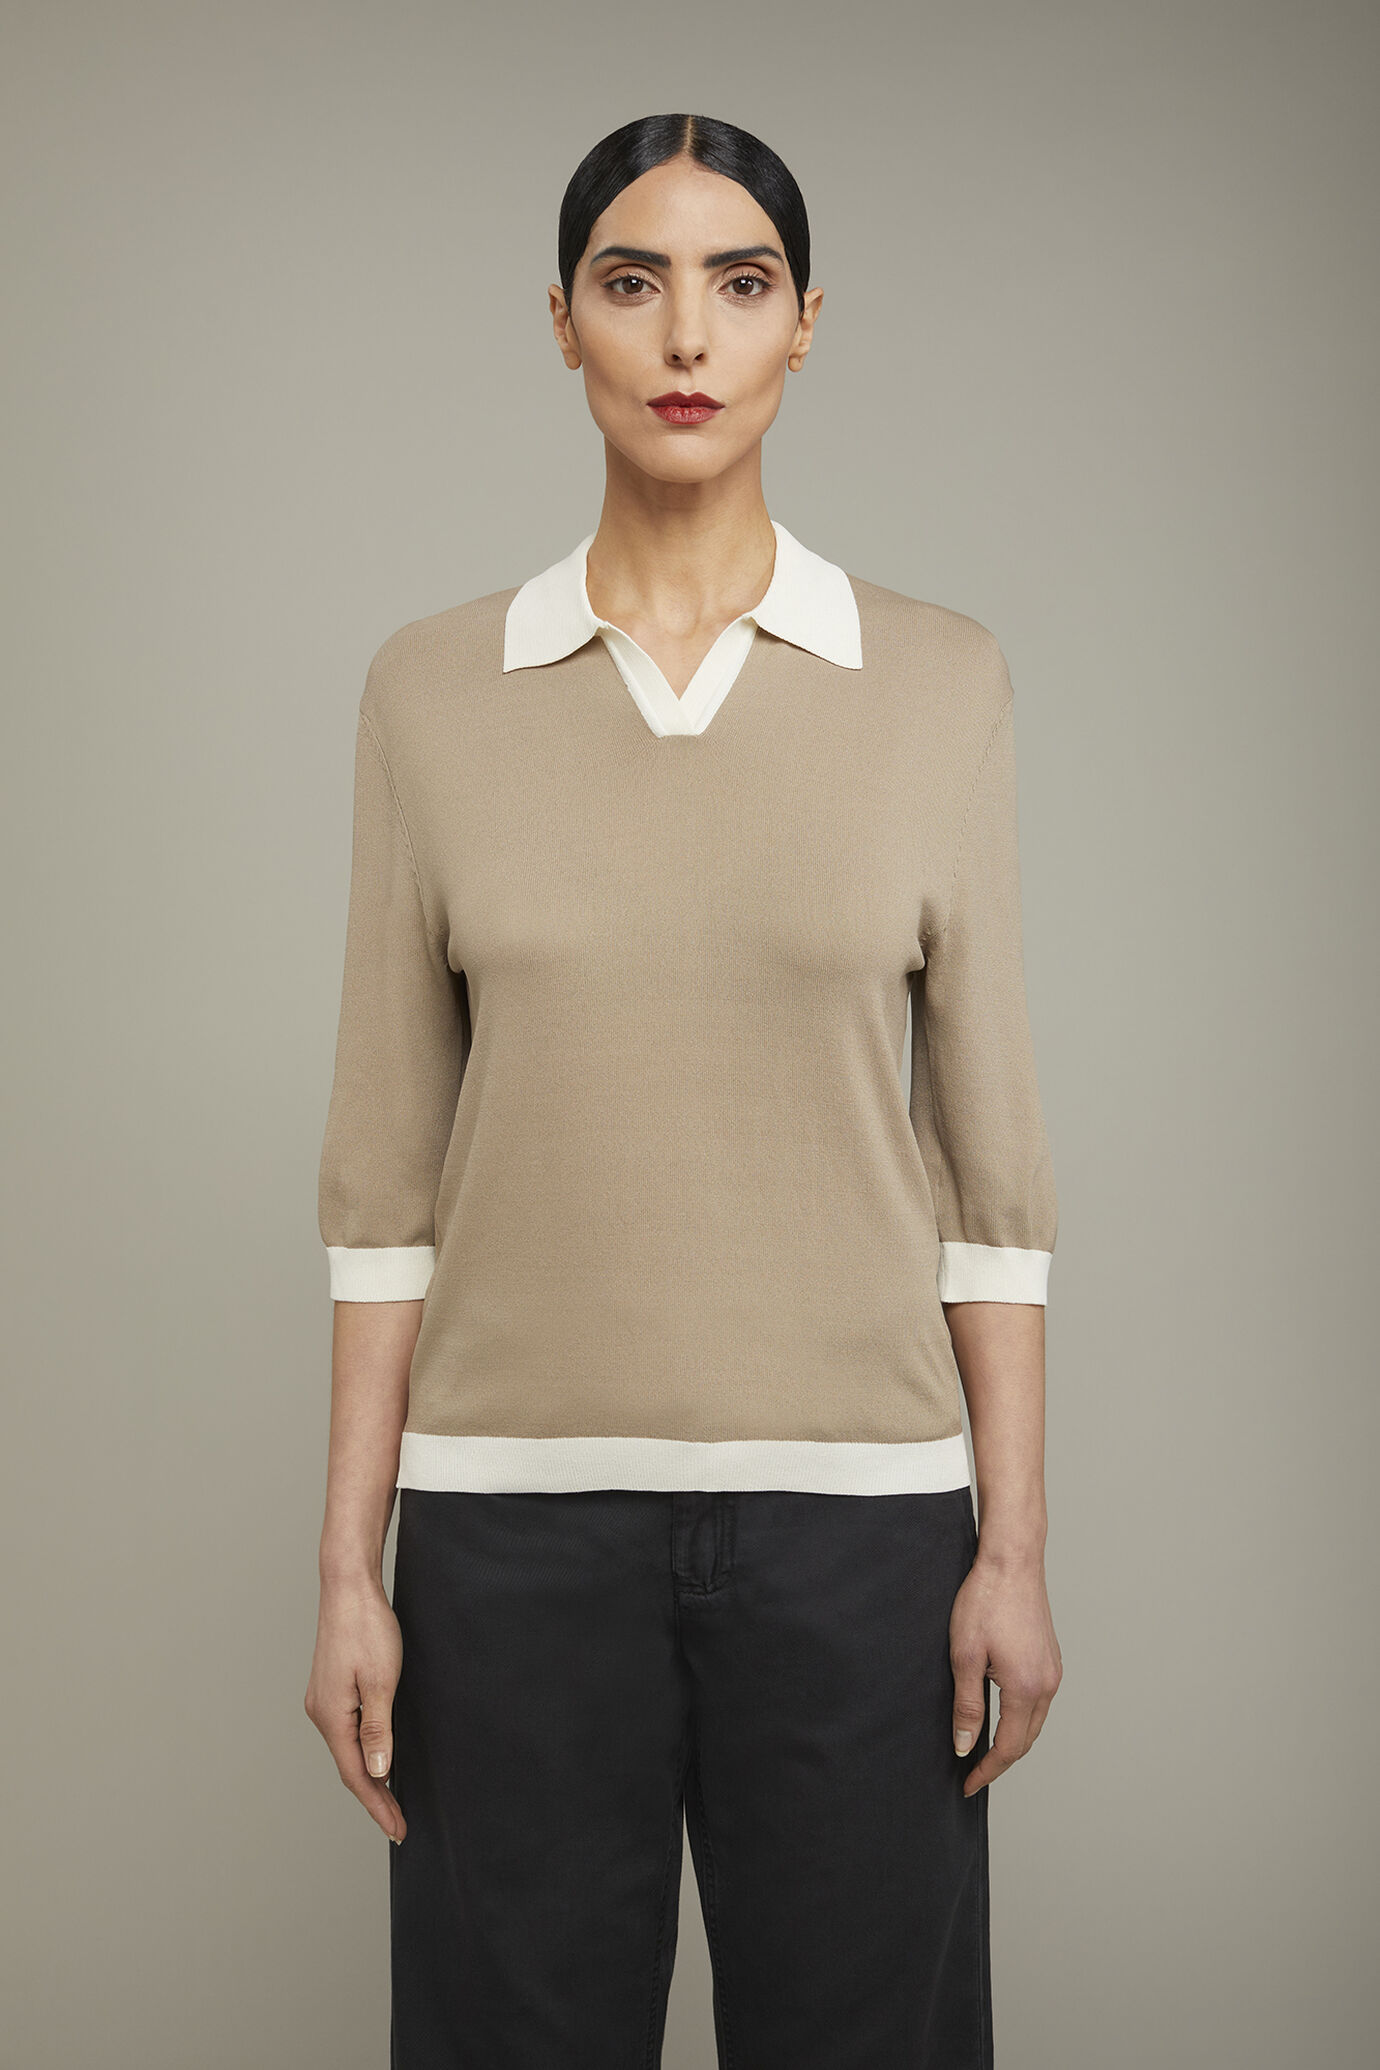 Women’s polo with three-quarter sleeve regular fit